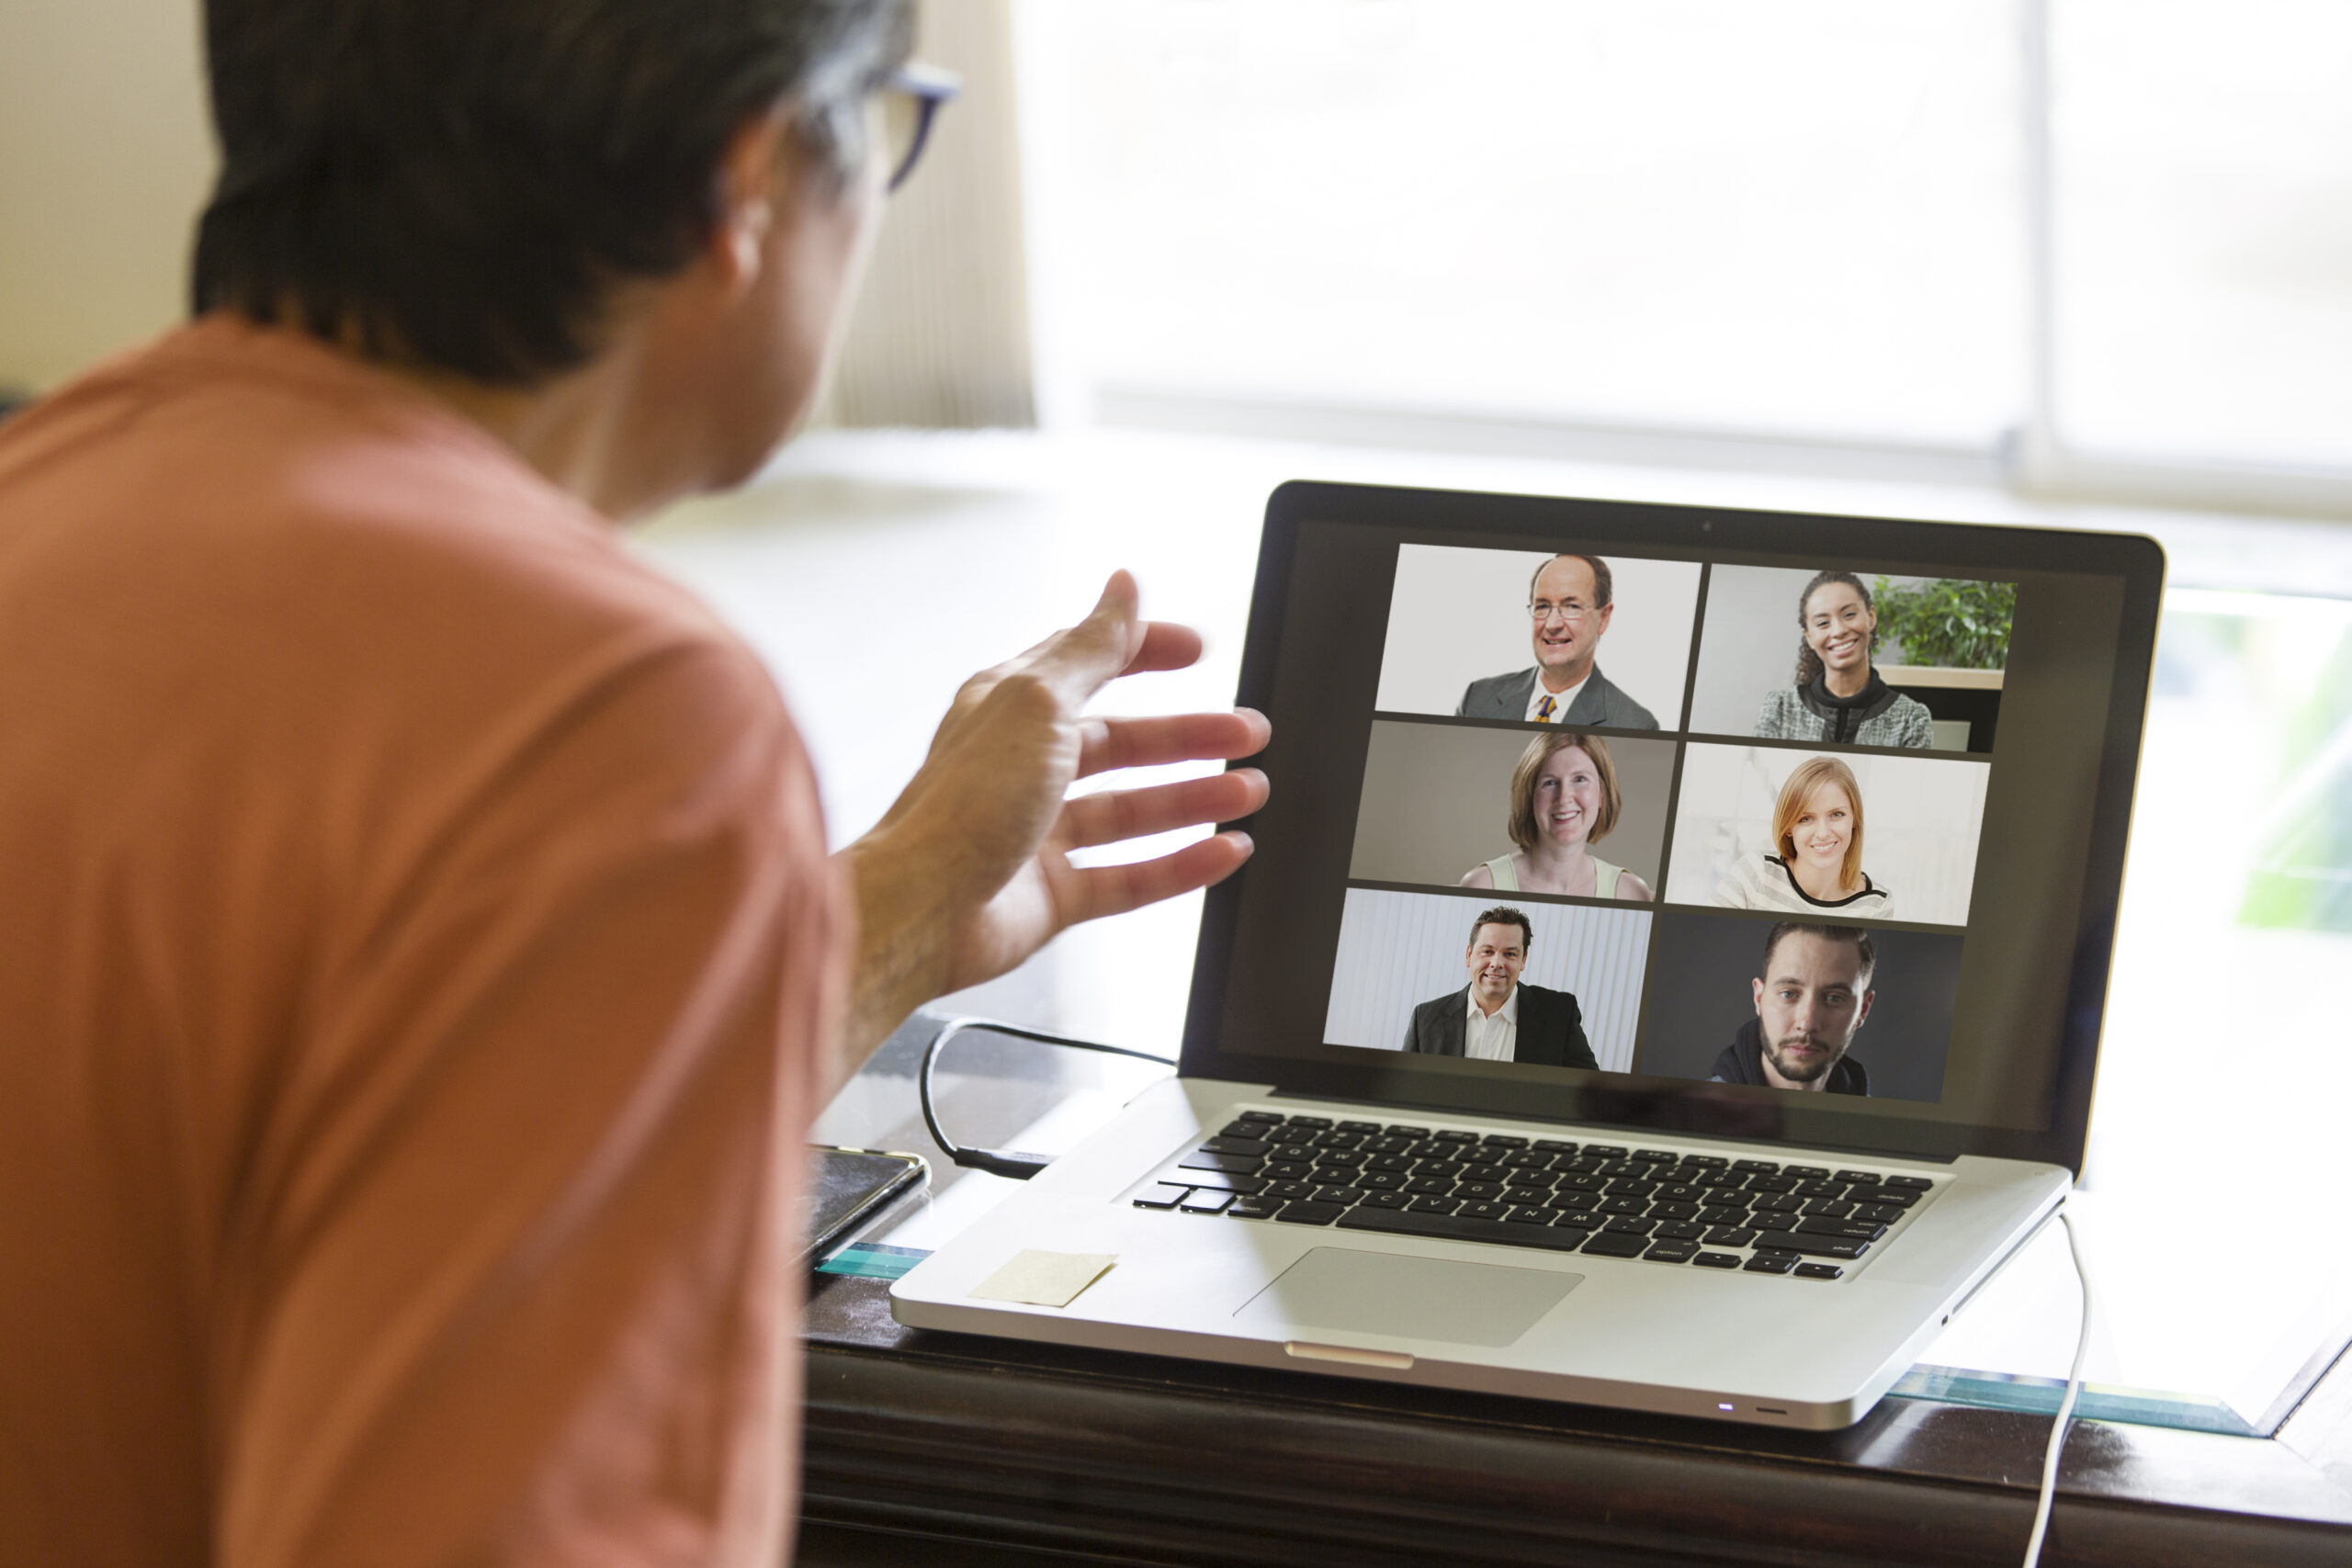 Remote team members hold meeting using virtual video conference software